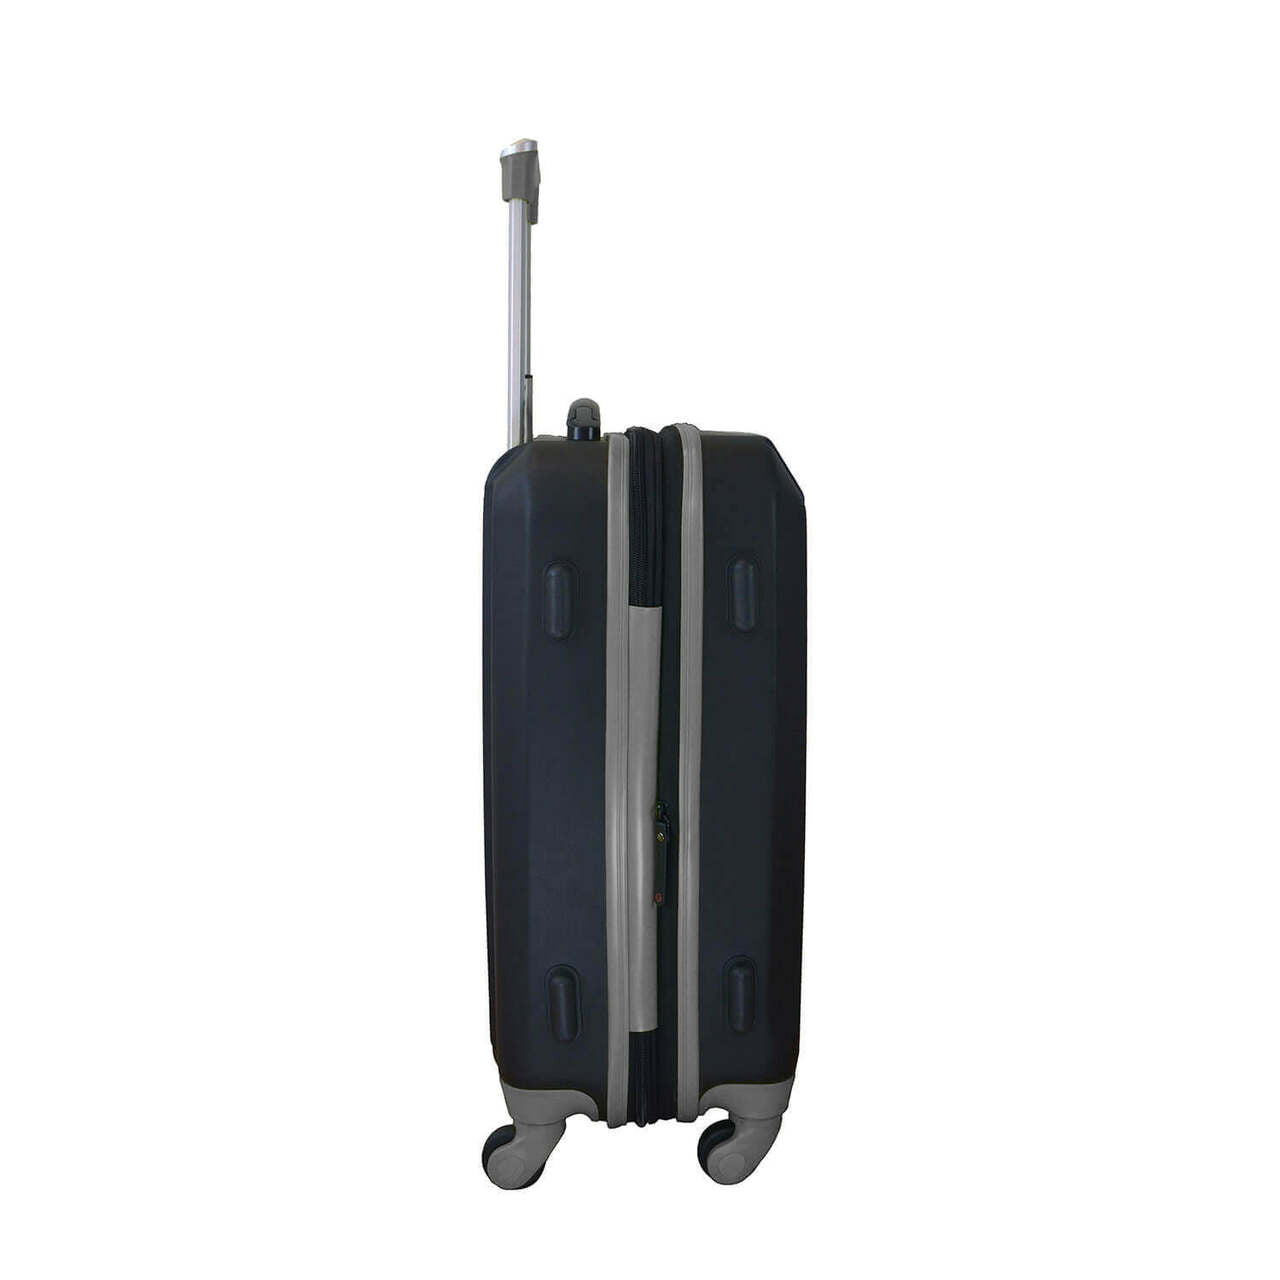 Bears Carry On Spinner Luggage | Chicago Bears Hardcase Two-Tone Luggage Carry-on Spinner in Black